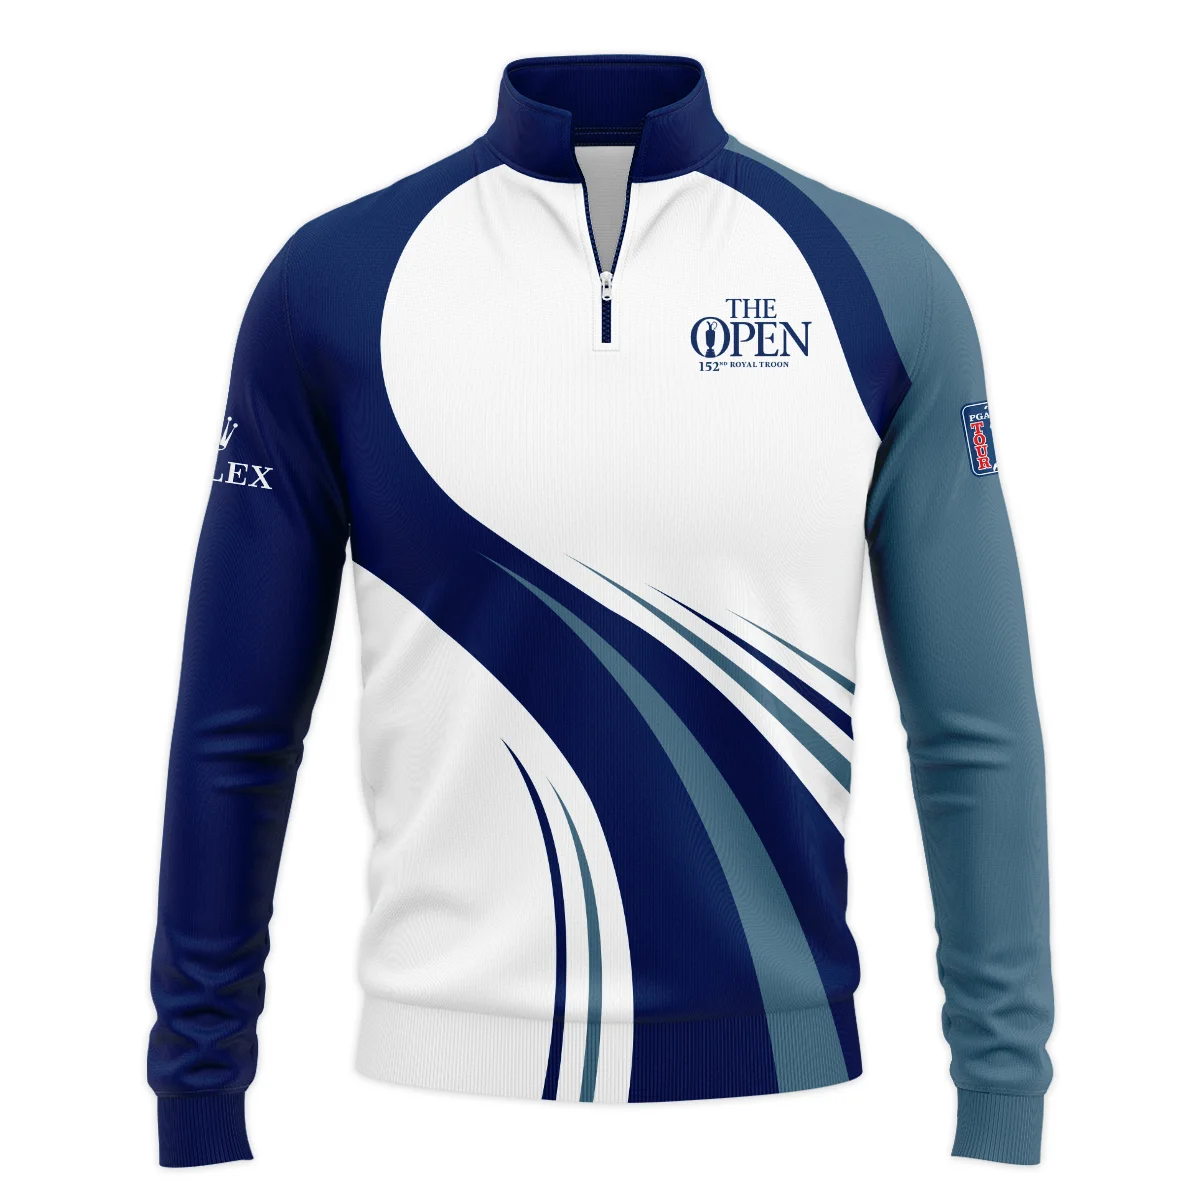 152nd Open Championship Rolex White Mostly Desaturated Dark Blue Performance Quarter Zip Sweatshirt With Pockets All Over Prints HOTOP270624A02ROXTS